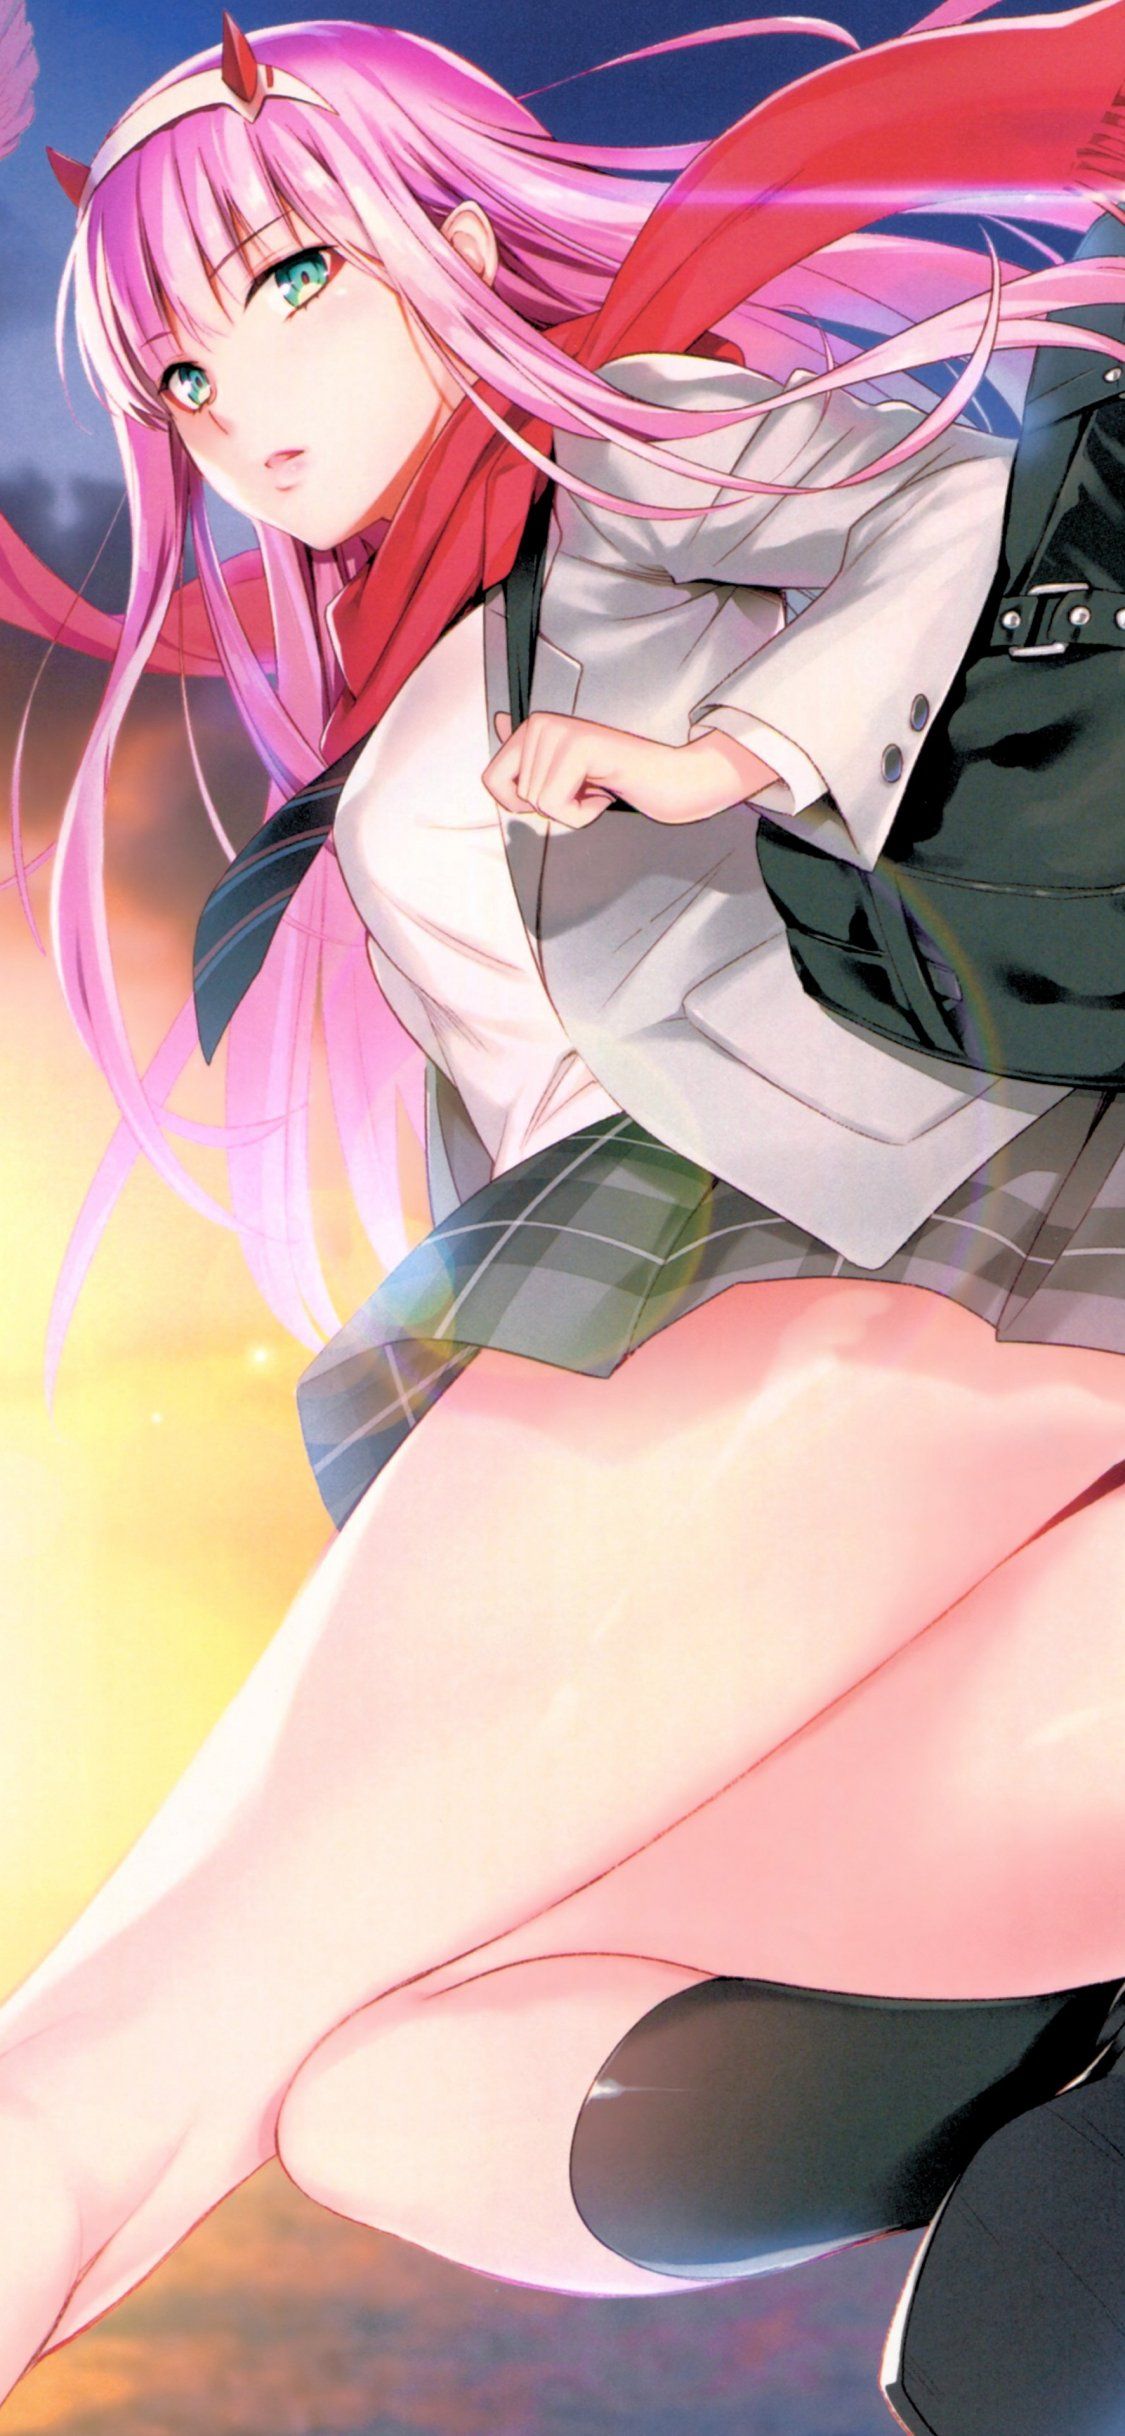 NawPic  Zero Two Download httpswwwnawpiccomzerotwo17 Download Zero  Two Wallpaper for free use for mobile and desktop Discover more android  Anime background cute iphone Wallpaper  Facebook